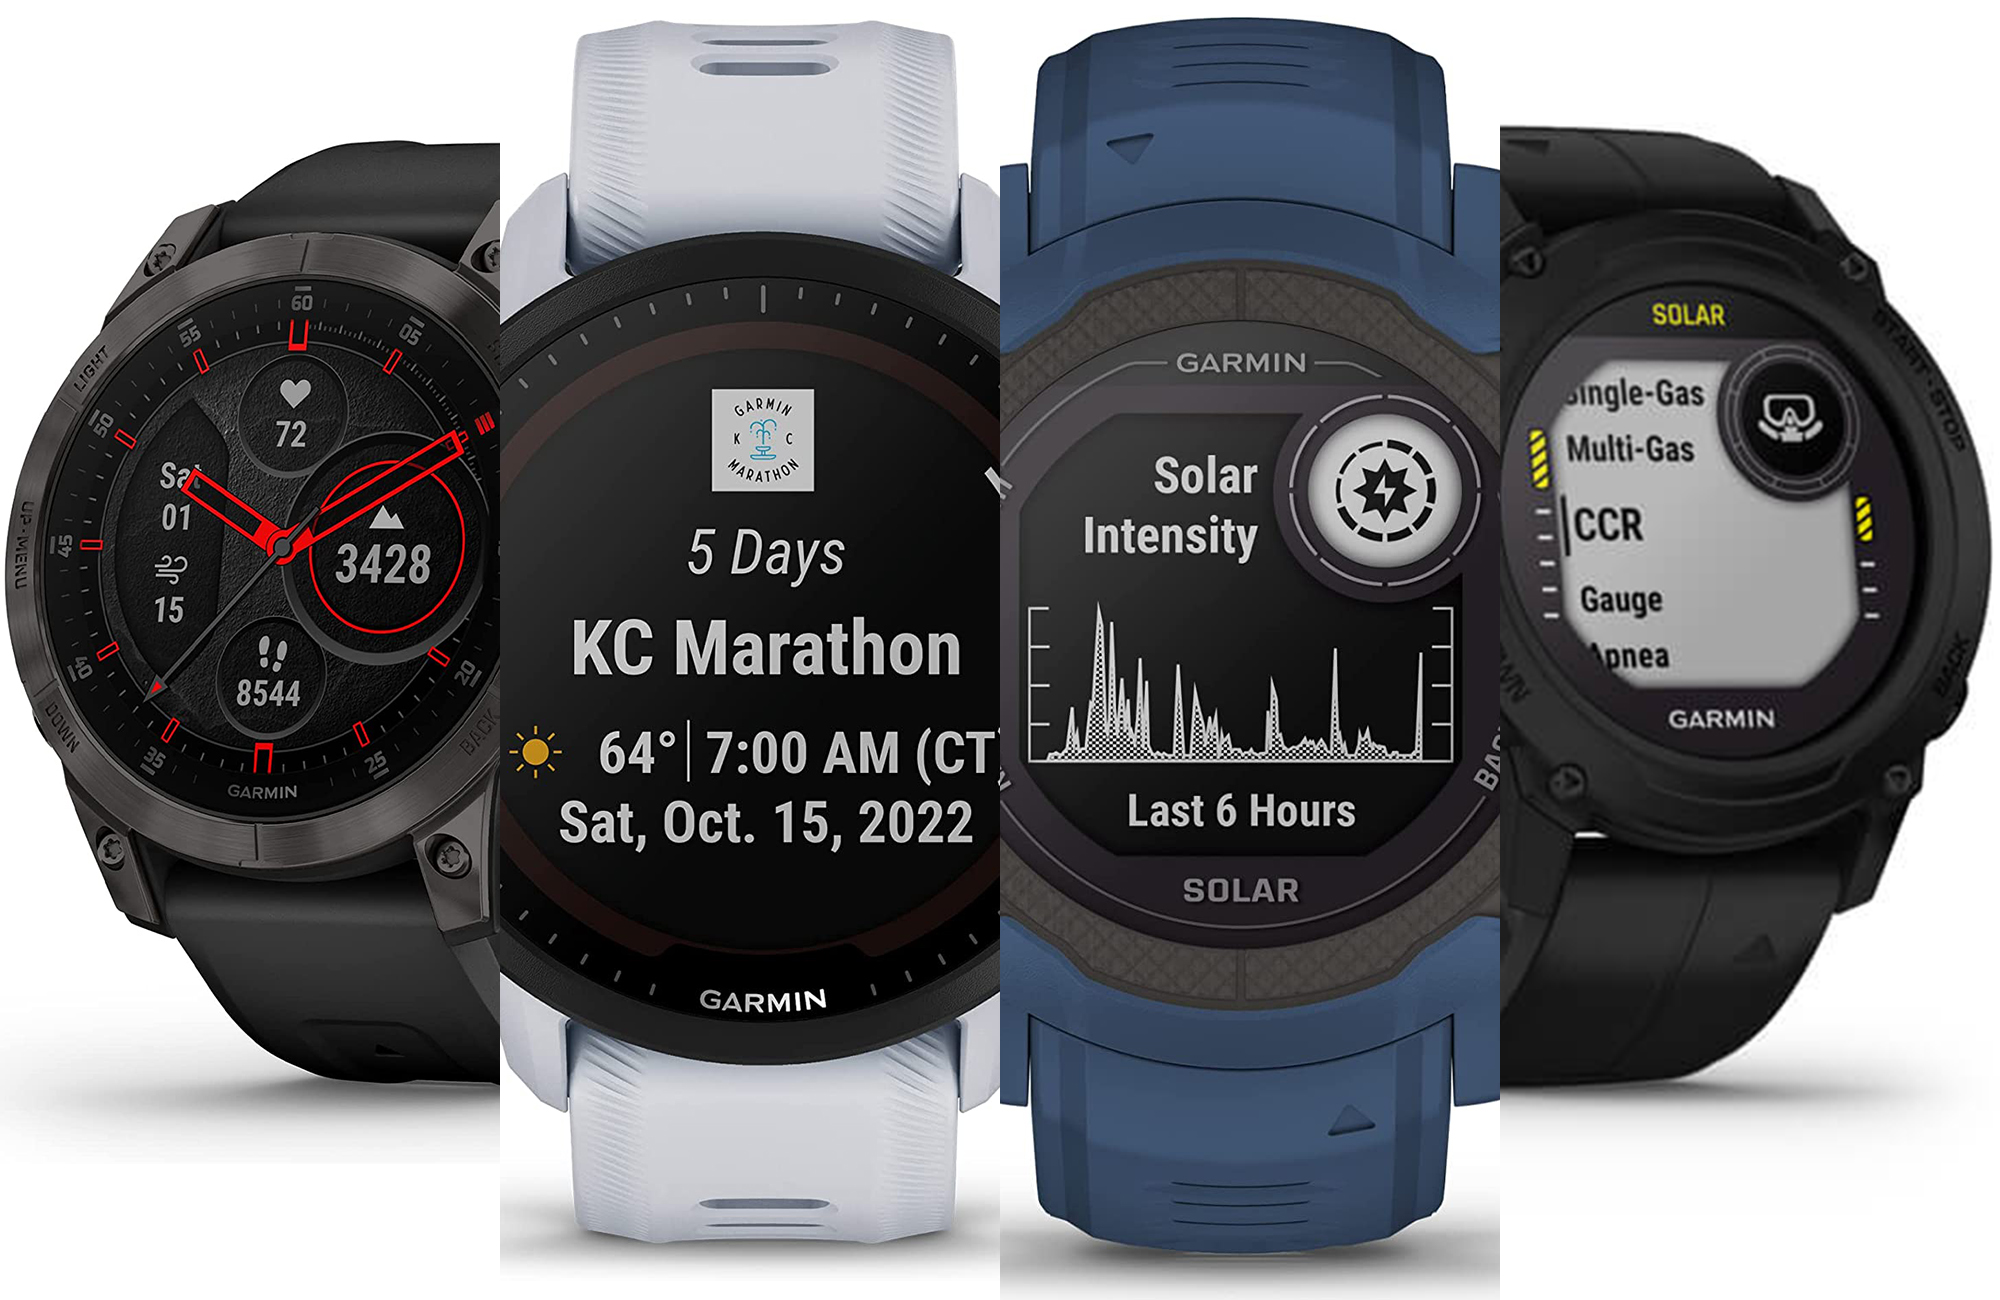 The best Garmin smartwatches for men and women